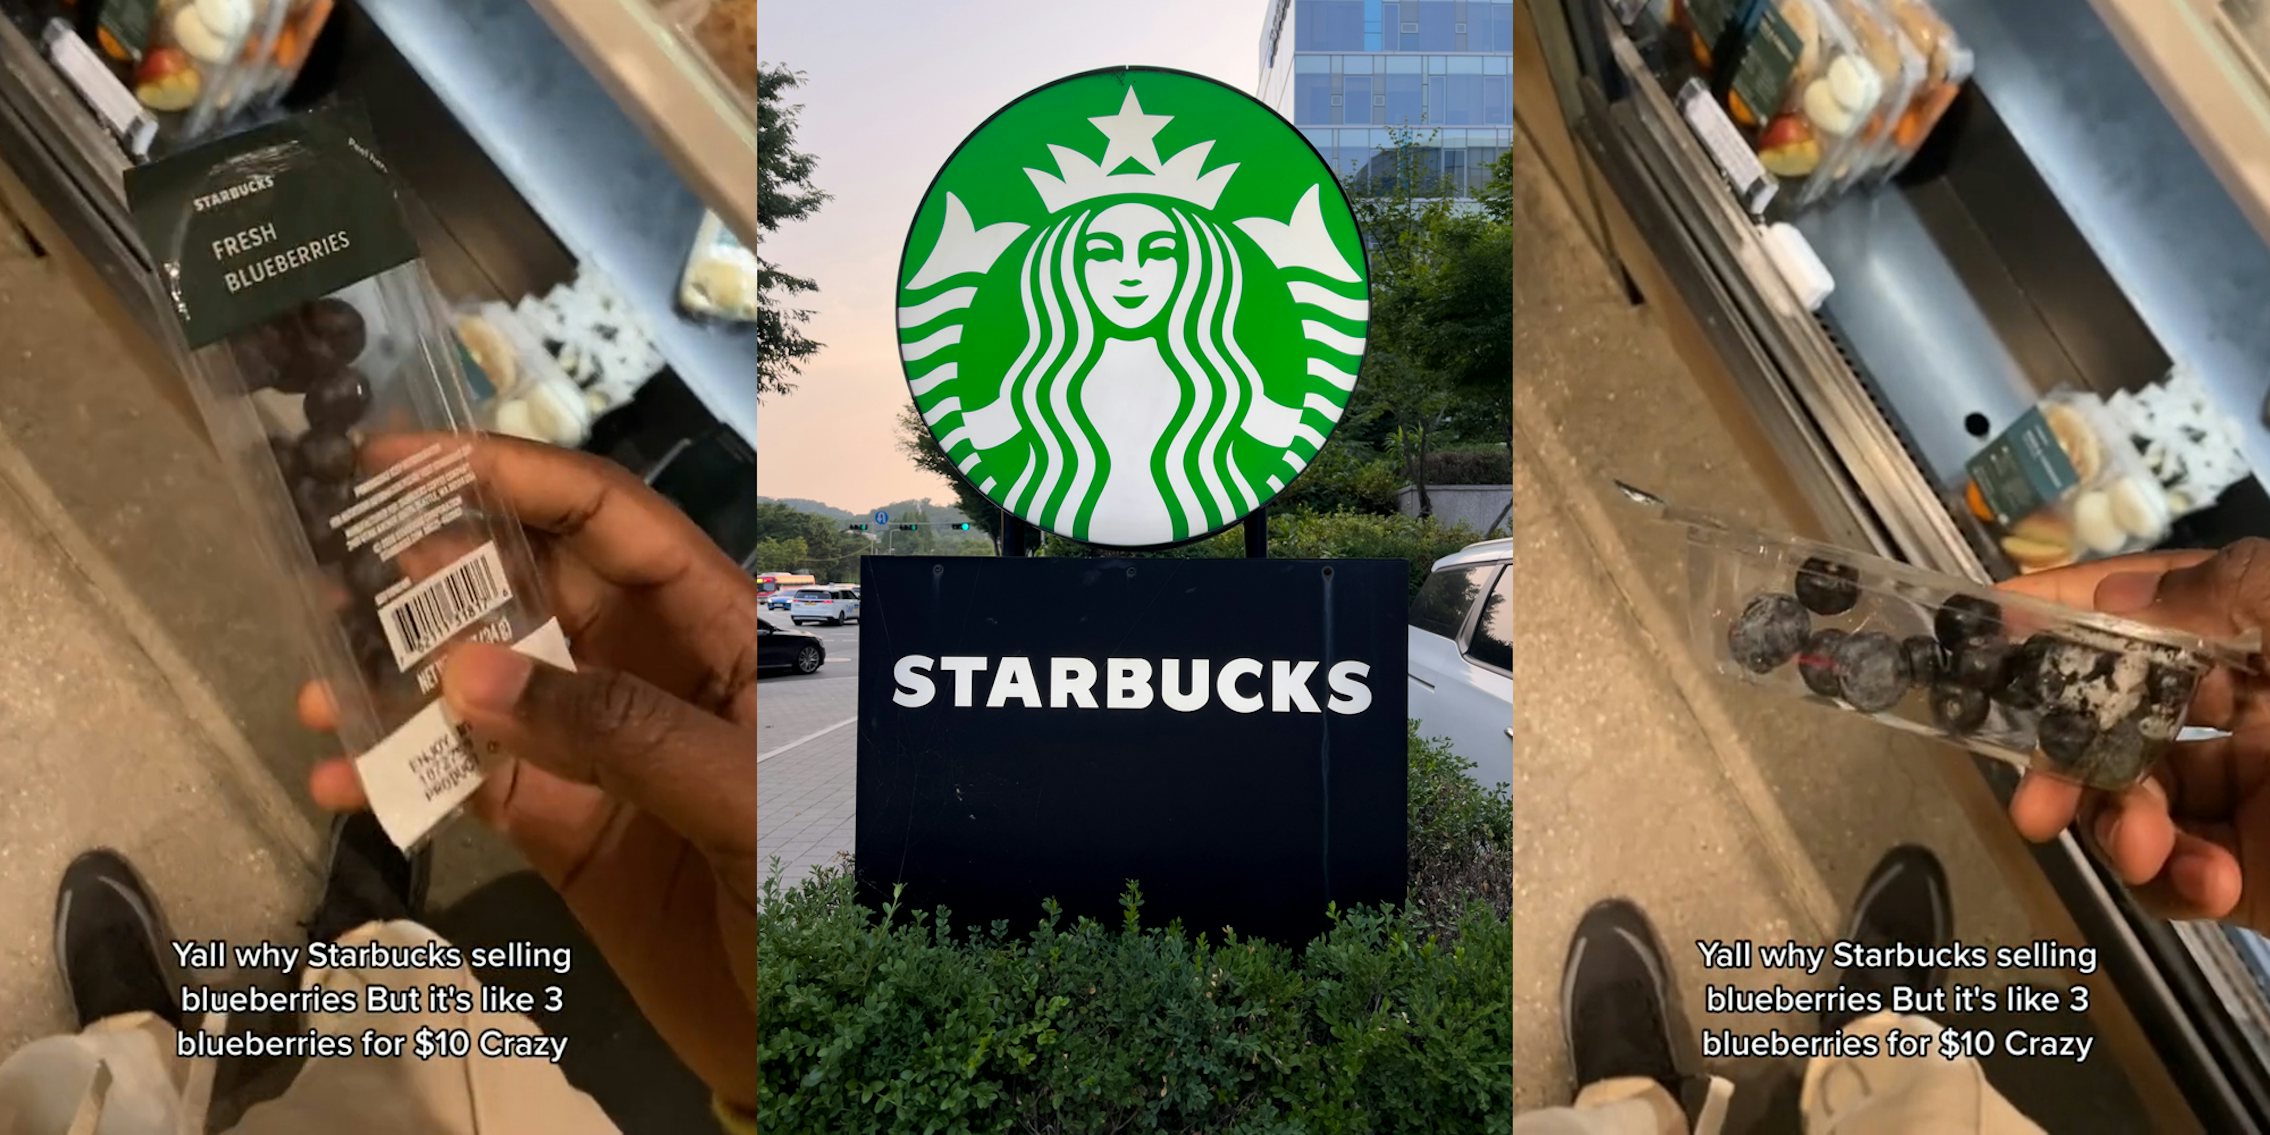 person holding small container of blueberries with caption 'Yall why Starbucks selling blueberries But it's like 3 blueberries for $10 Crazy' (l) Starbucks sign outside (c) person holding small container of blueberries with caption 'Yall why Starbucks selling blueberries But it's like 3 blueberries for $10 Crazy' (r)